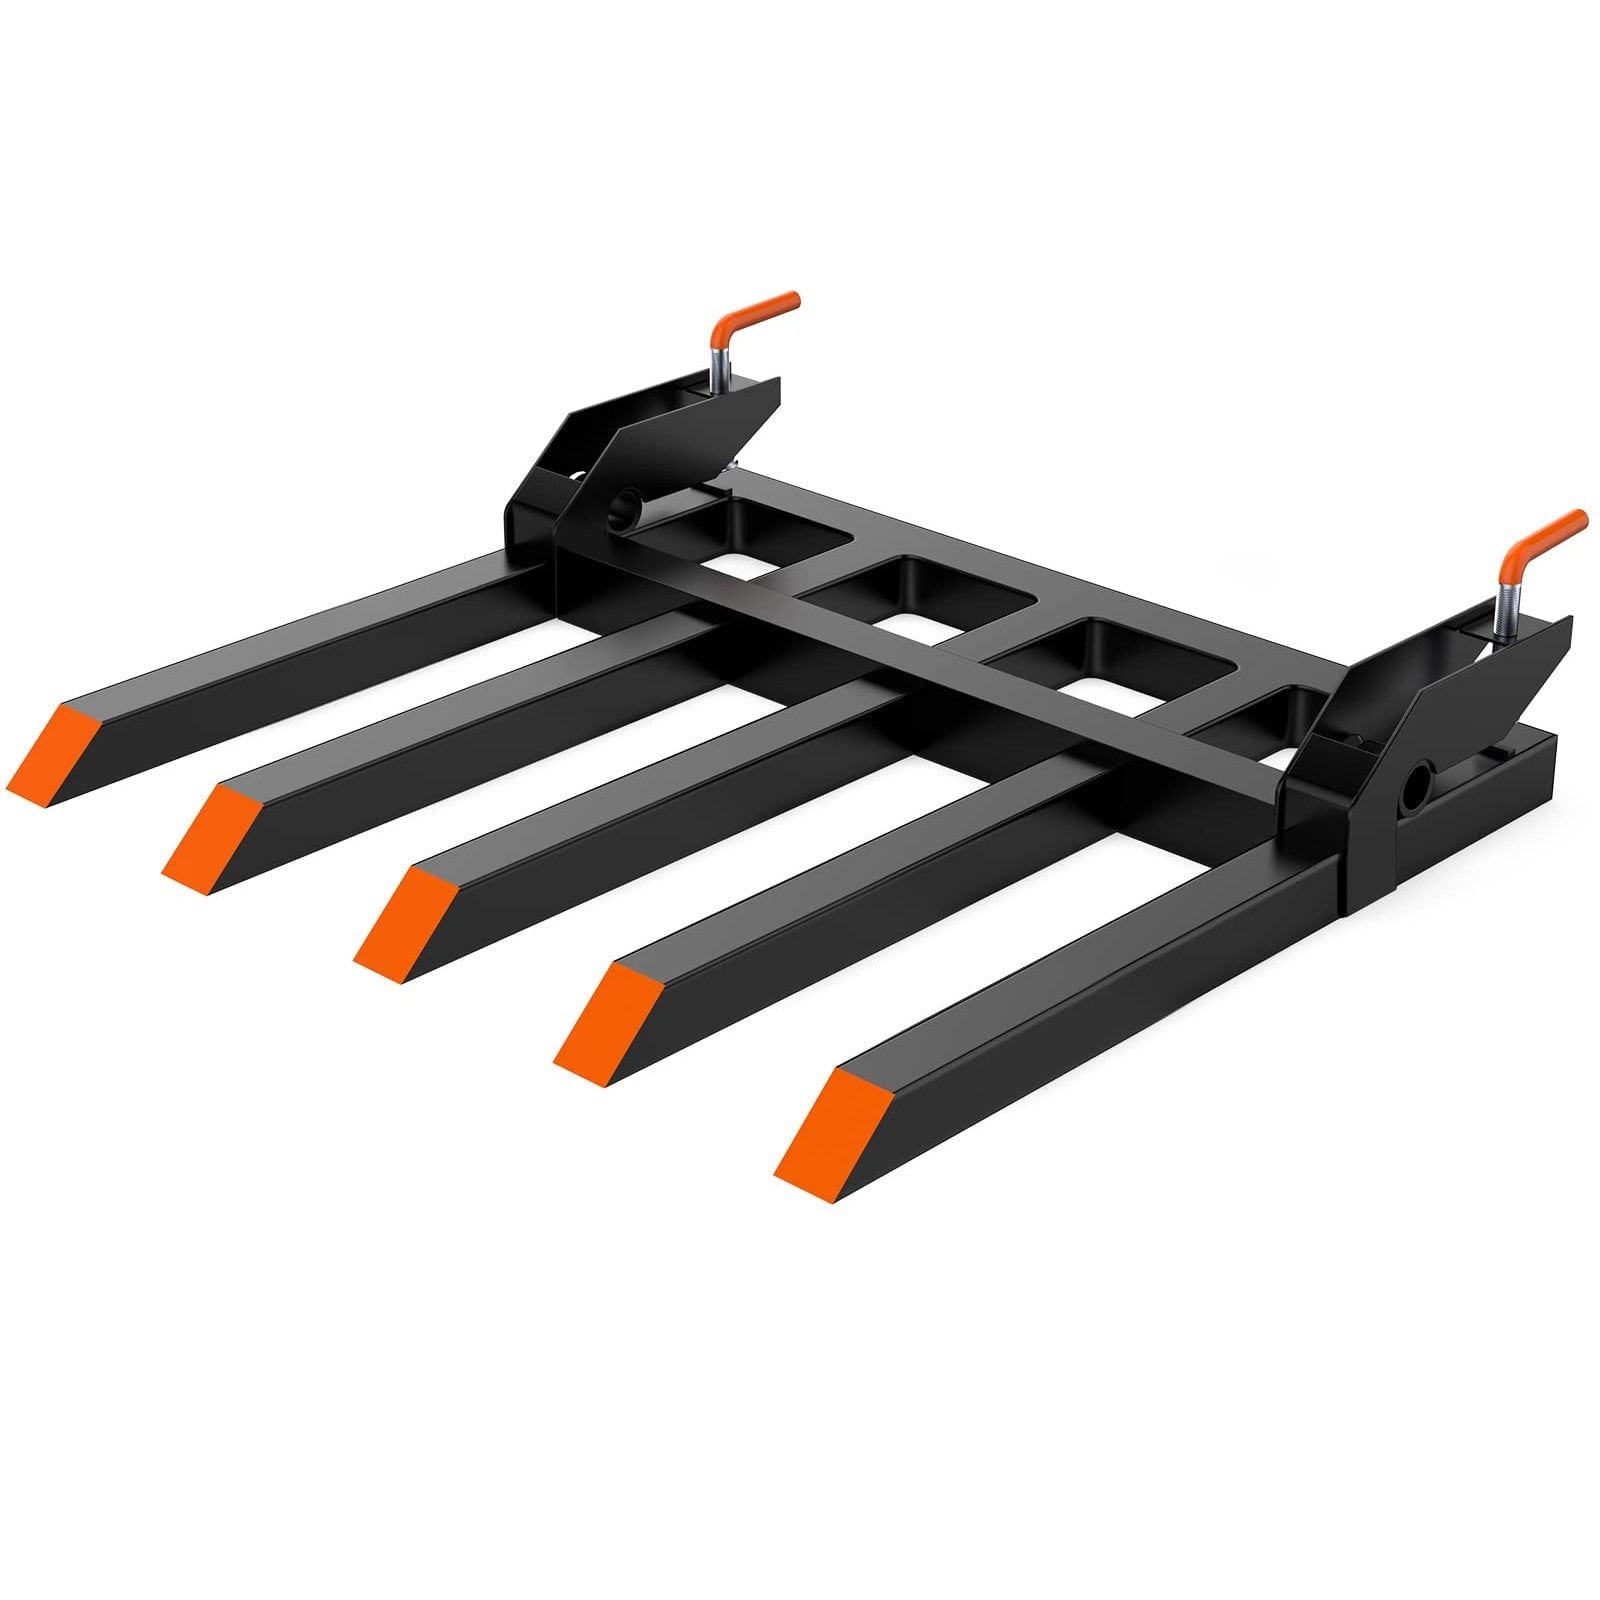 GARVEE 2500 LBS 42 Inch Clamp on Debris Forks Heavy Duty Clamp-on Pallet Forks for Tractor Black